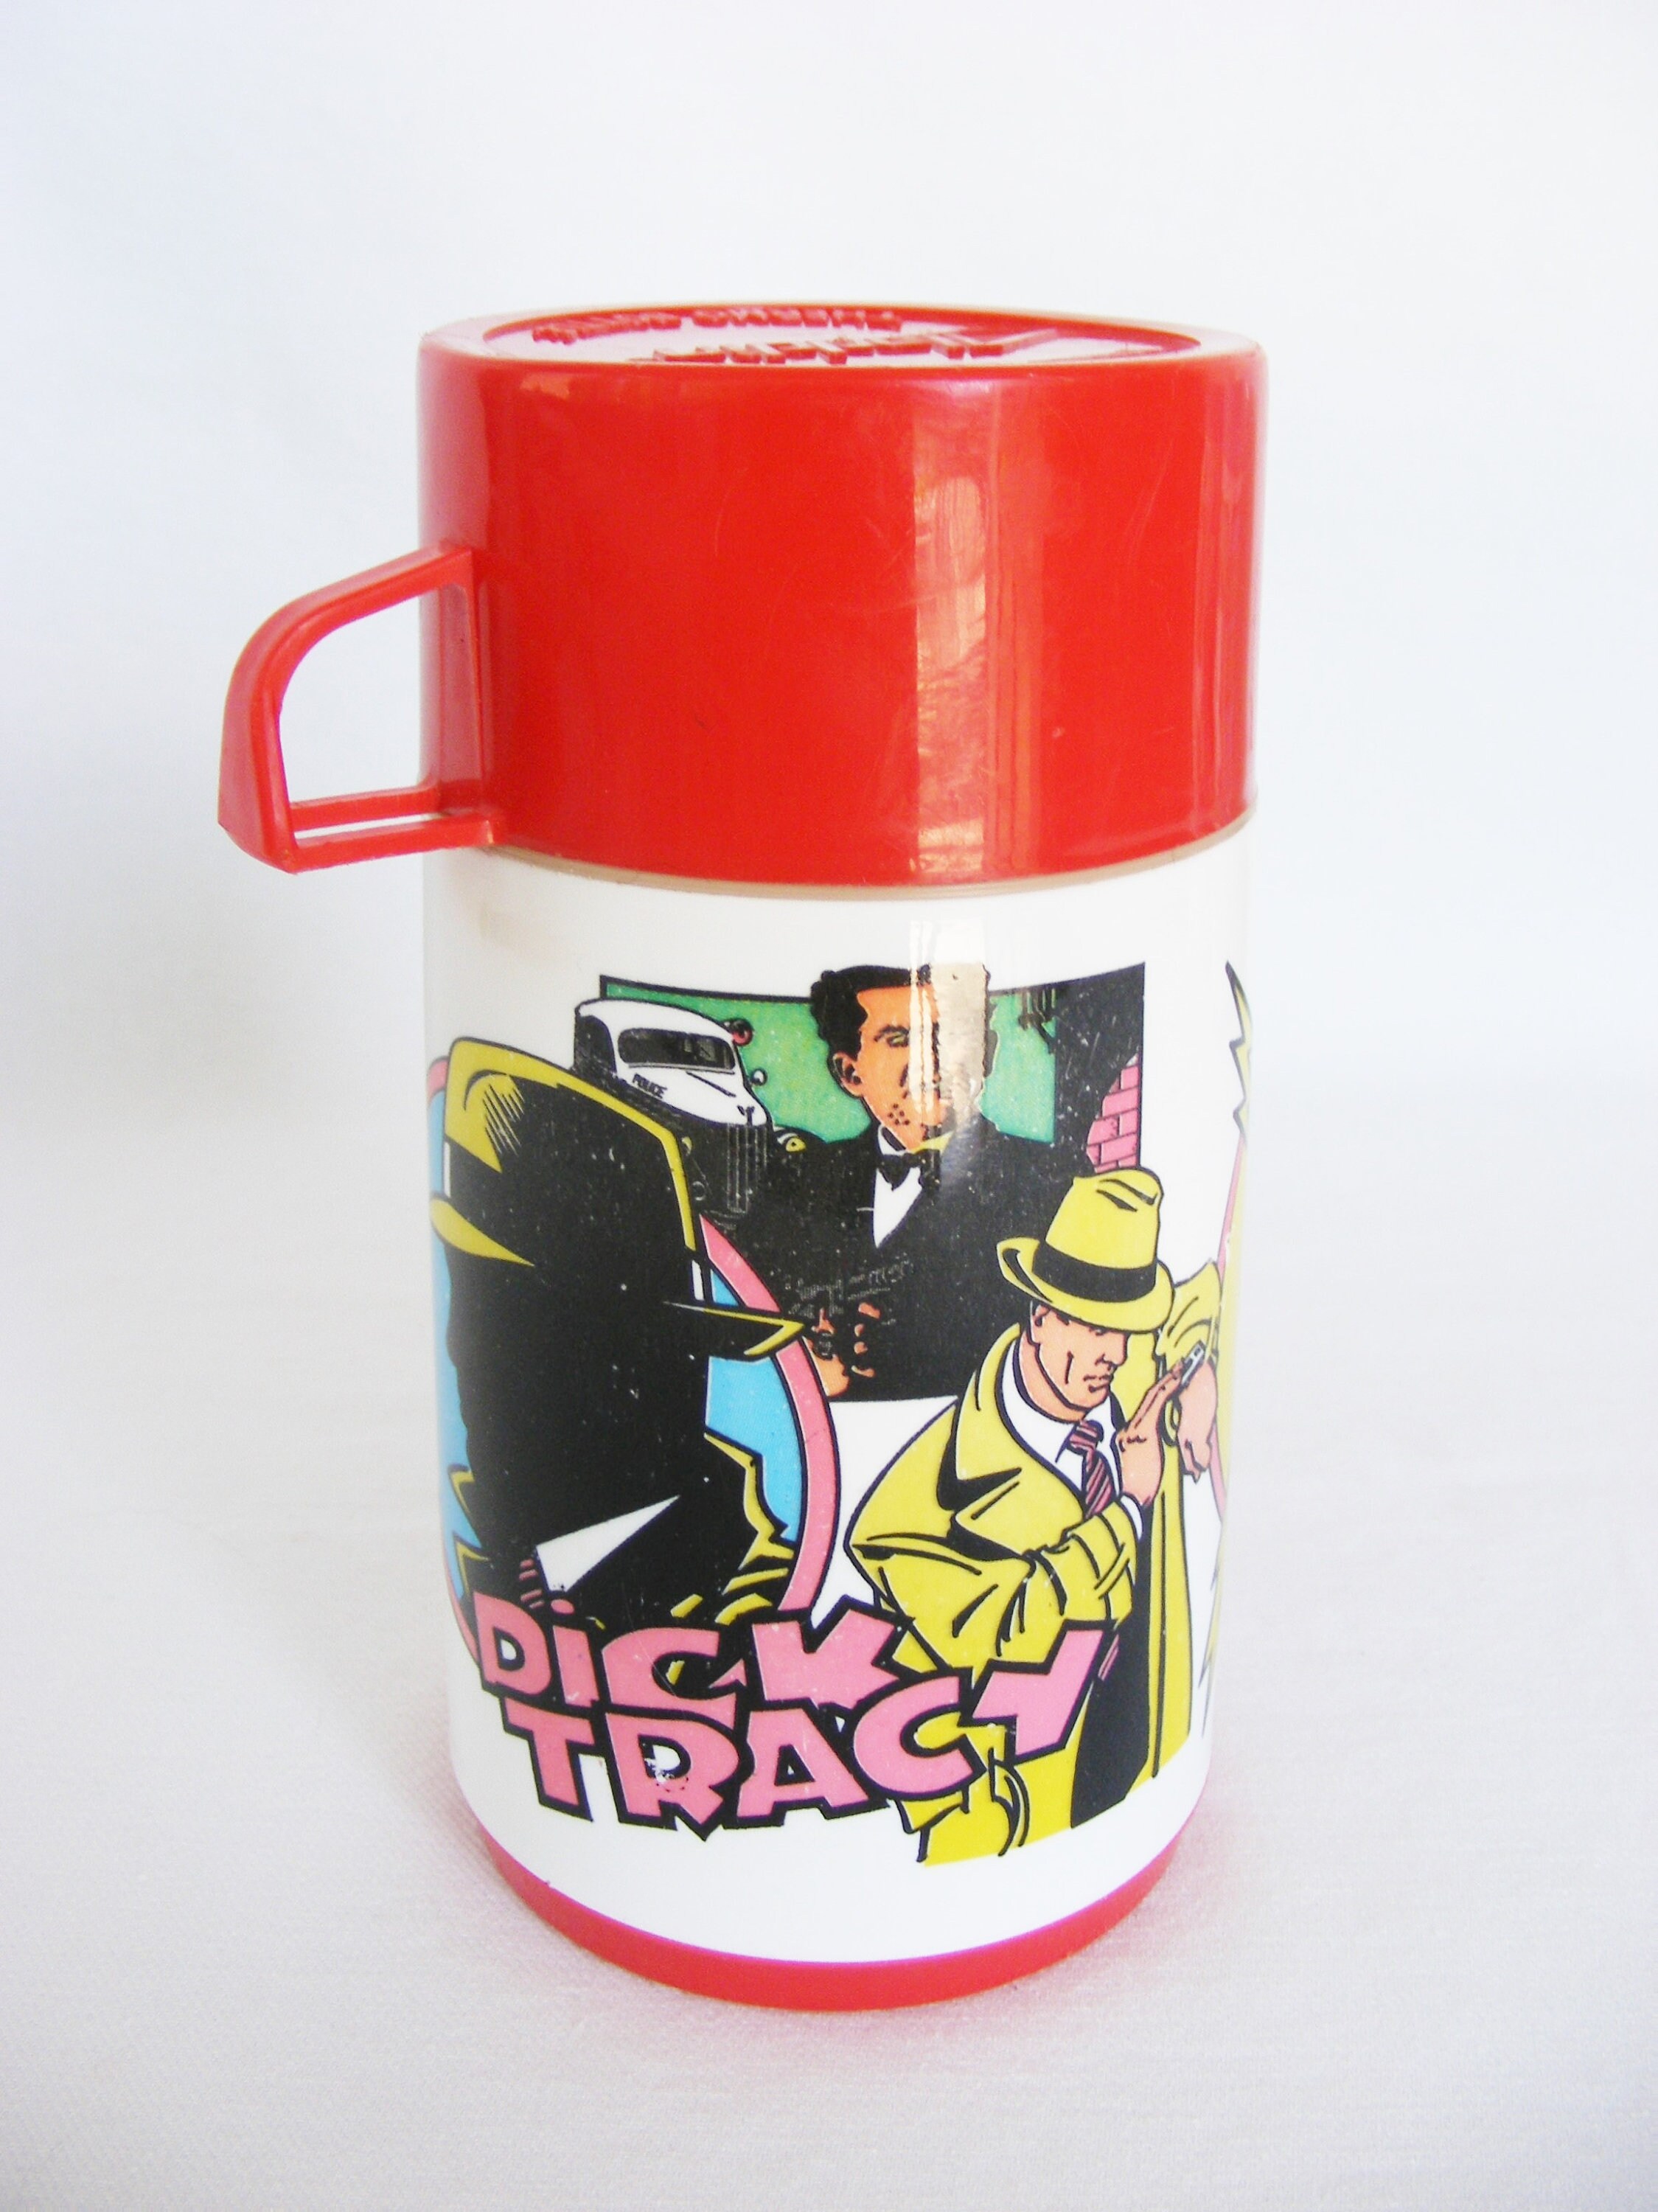 Dick Tracy police car coffee mug from our Mugs & Cups collection, Disney  collectibles and memorabilia